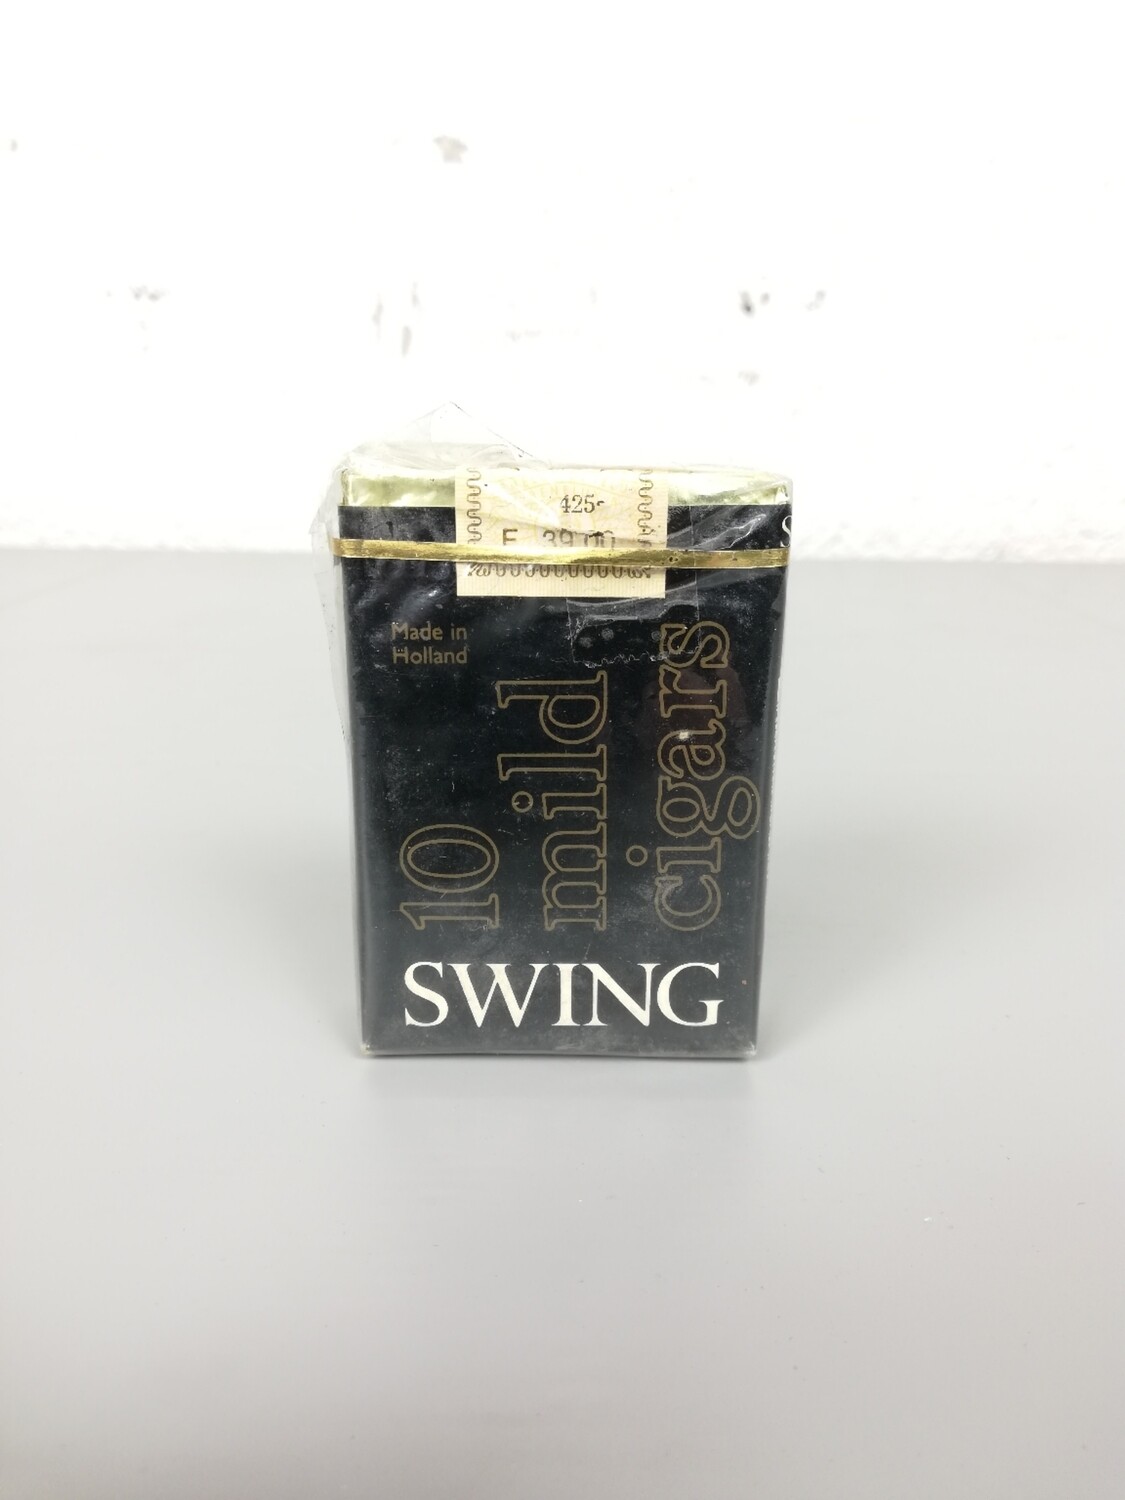 Old unopened packet Swing sigars